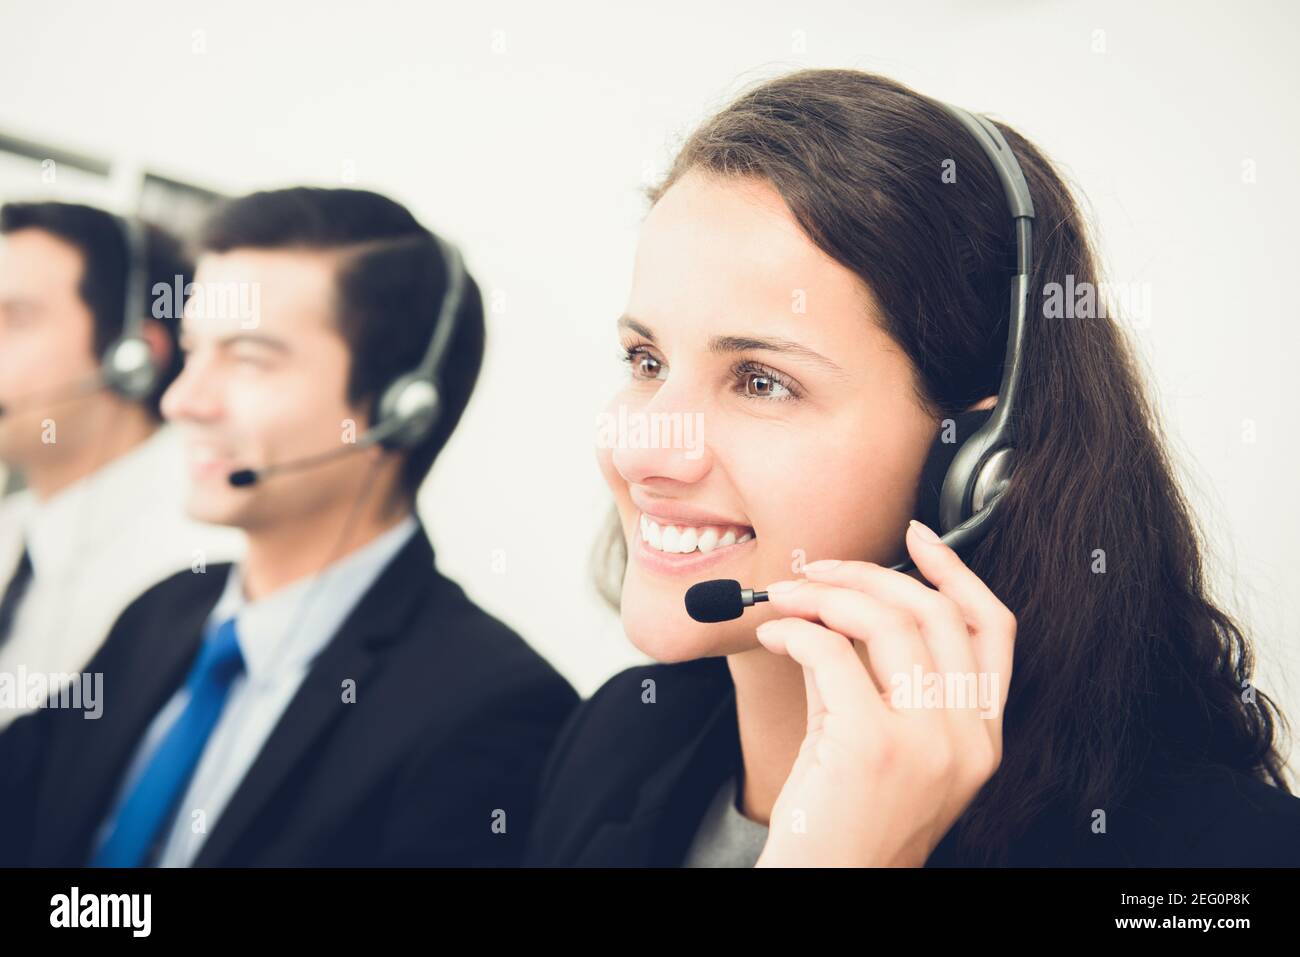 Beautiful smiling woman working in call center as an operator or telemarketer Stock Photo